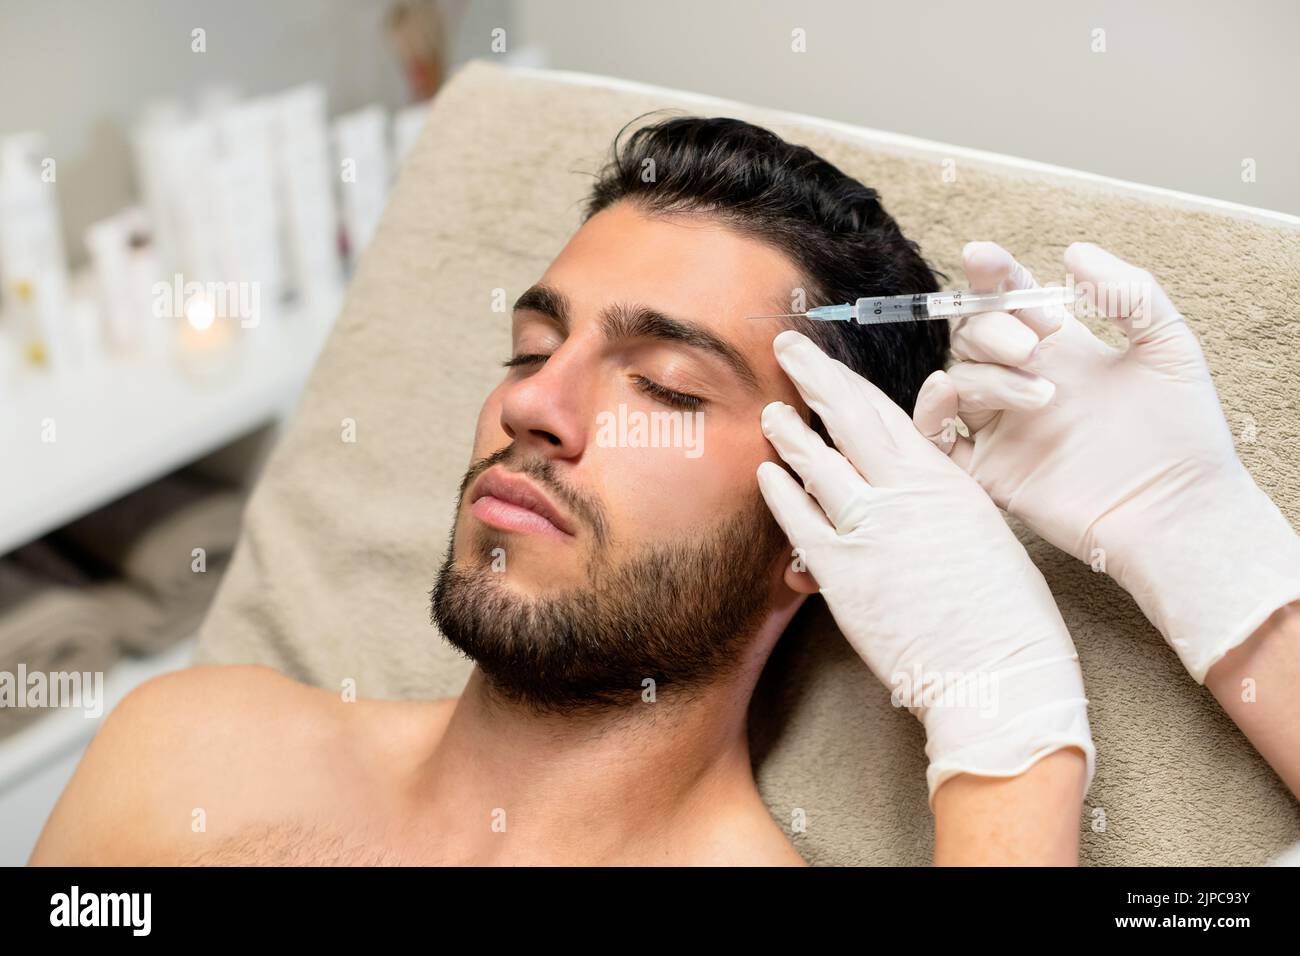 From above anonymous beautician in latex gloves injecting botulinum toxin into forehead of bearded young male client during cosmetology session in bea Stock Photo